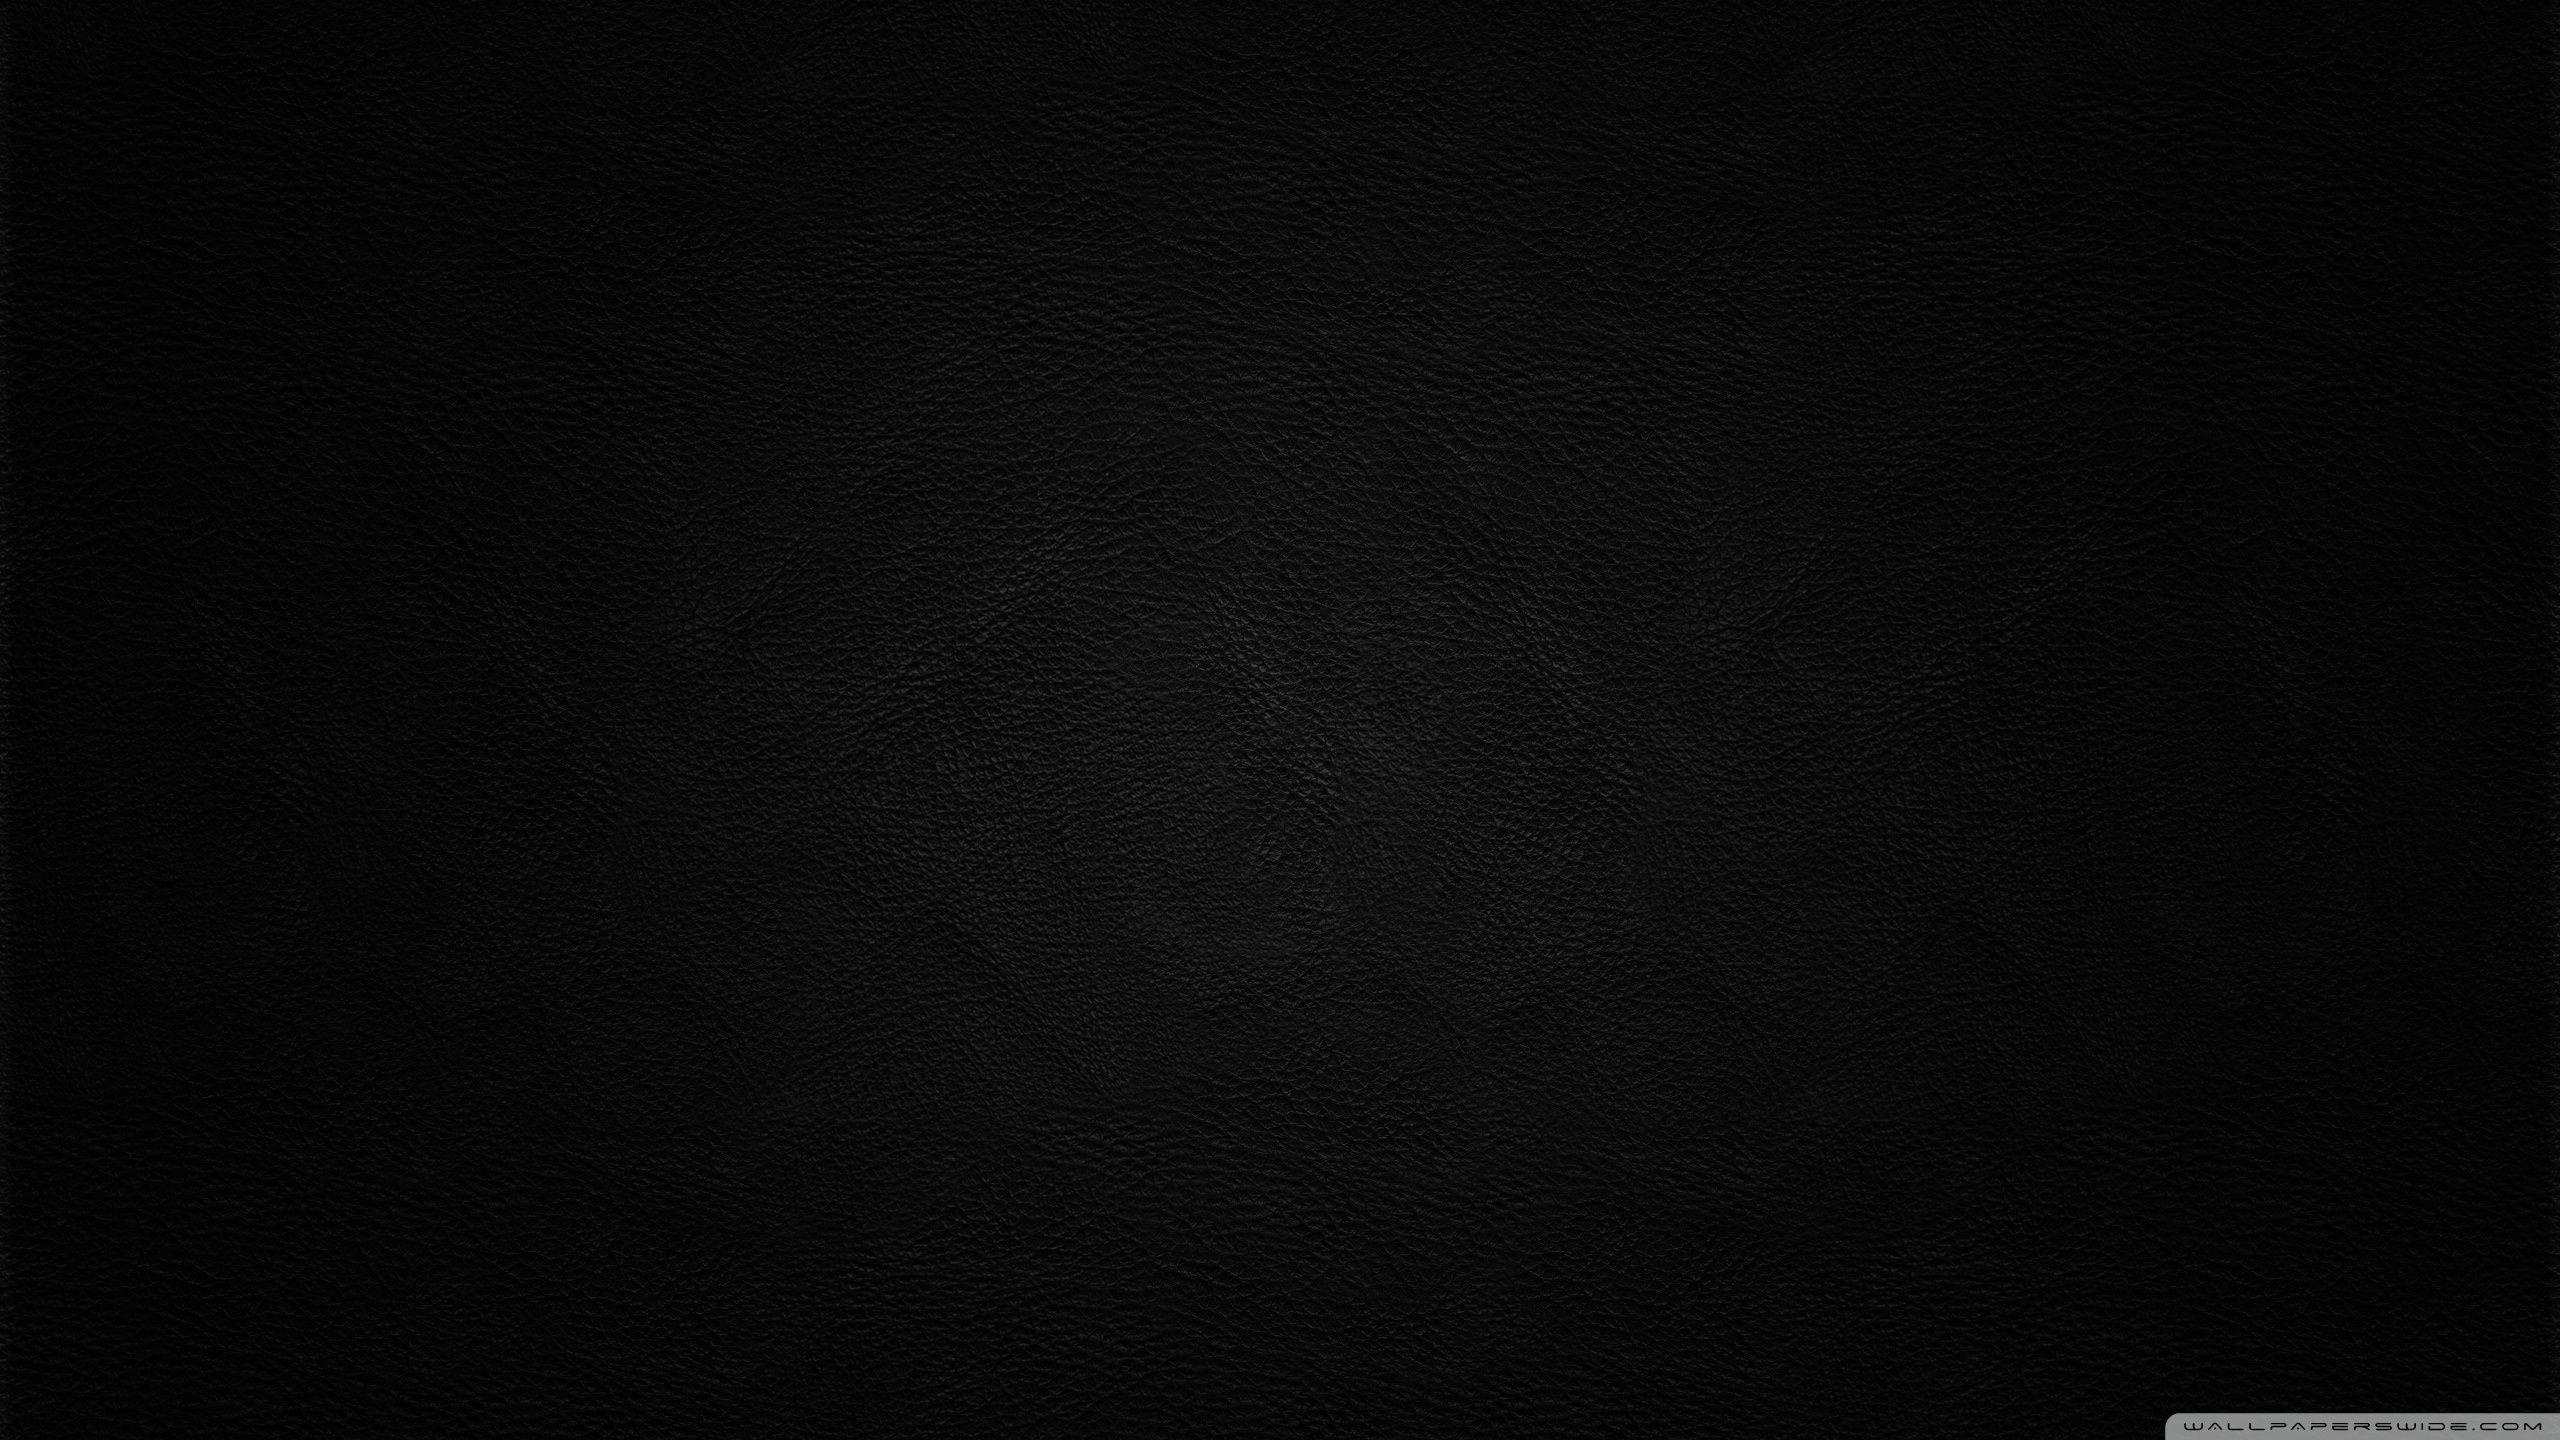  Black  Leather  Wallpapers  HD Wallpaper  Cave